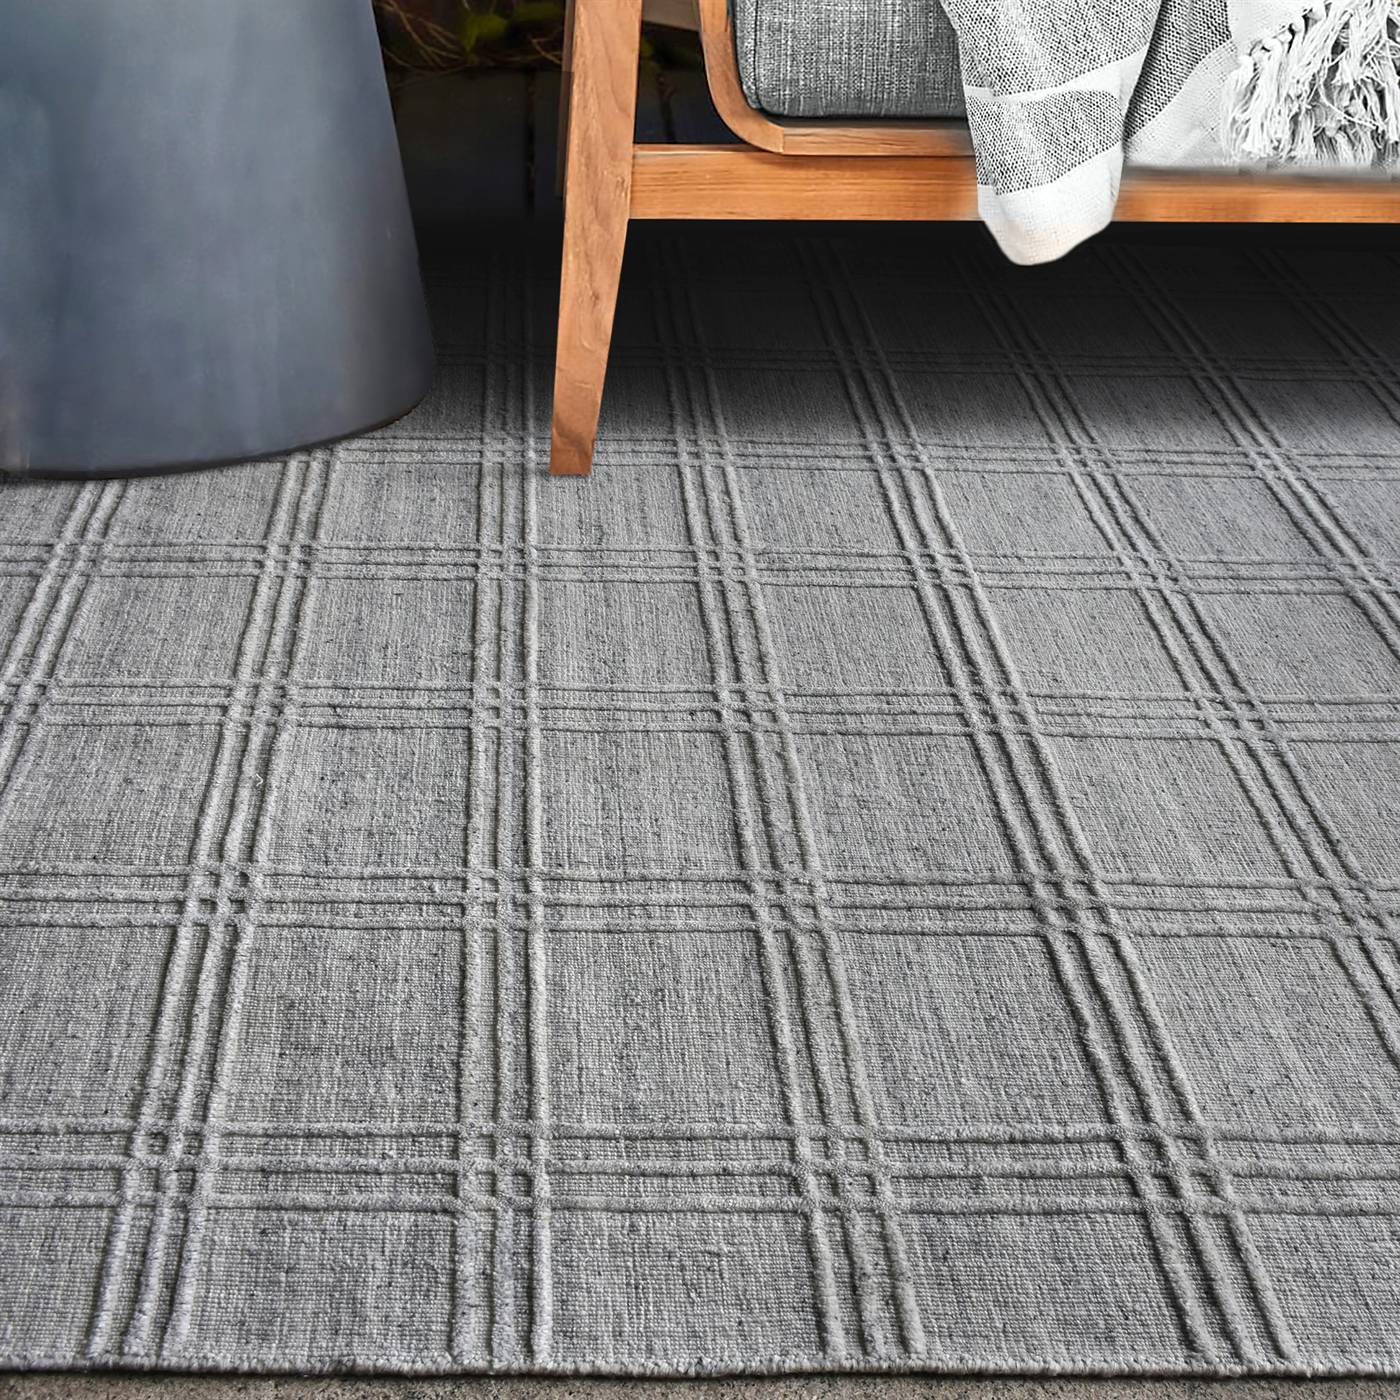 Area Rug, Bedroom Rug, Living Room Rug, Living Area Rug, Indian Rug, Office Carpet, Office Rug, Shop Rug Online, Grey, Pet, Hand Woven , Handwoven, All Cut, Contemporary 